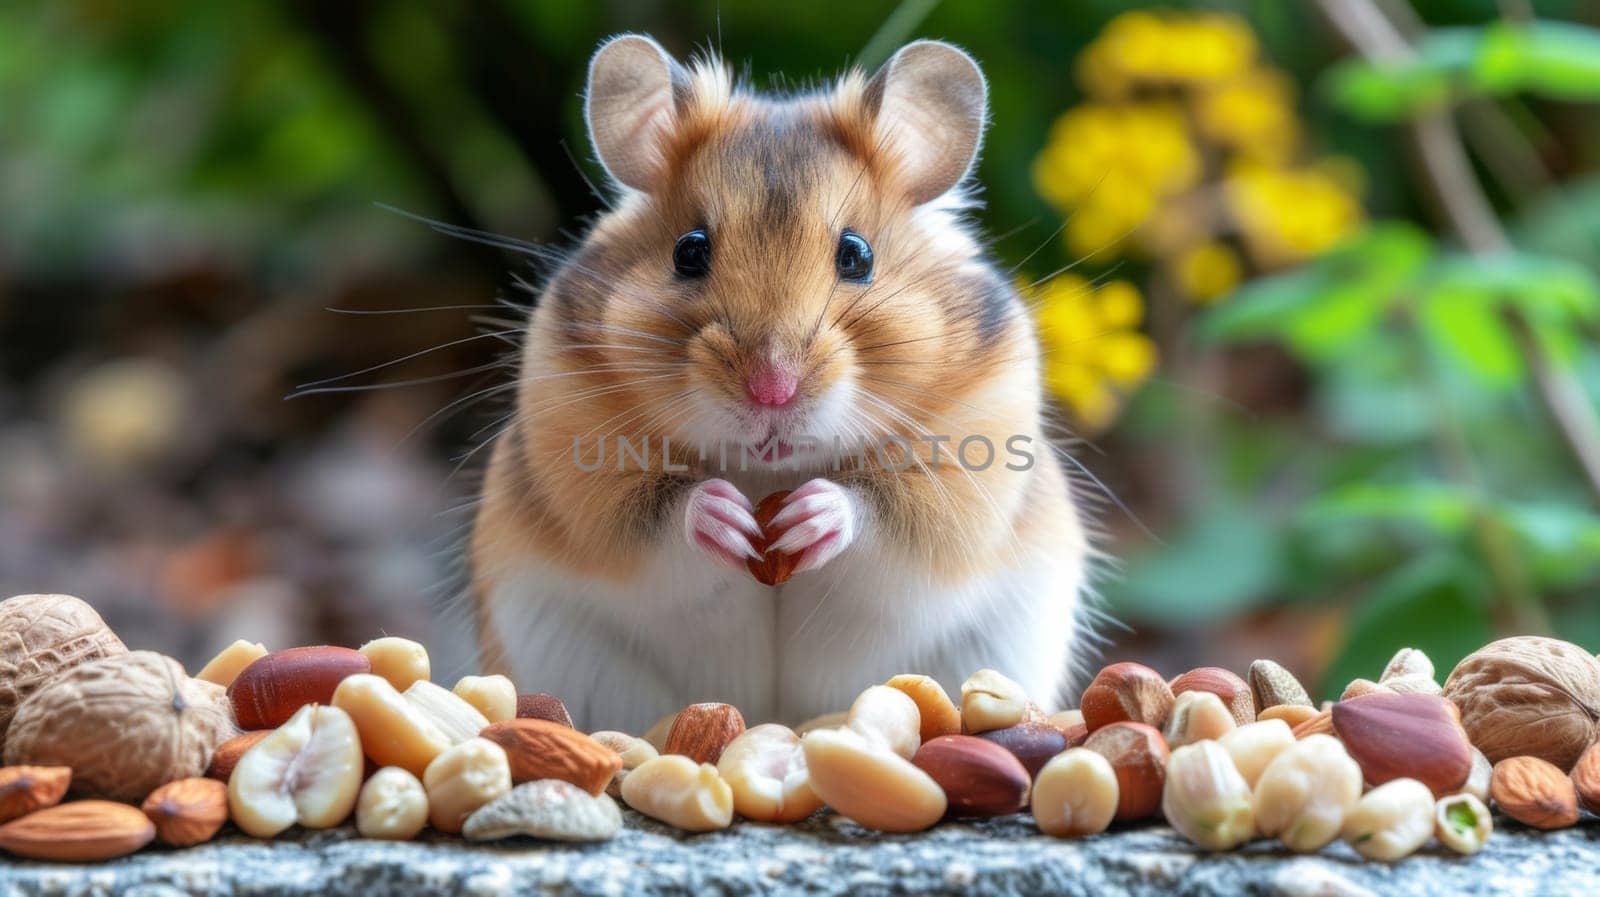 A hamster eating nuts and seeds in a garden setting, AI by starush